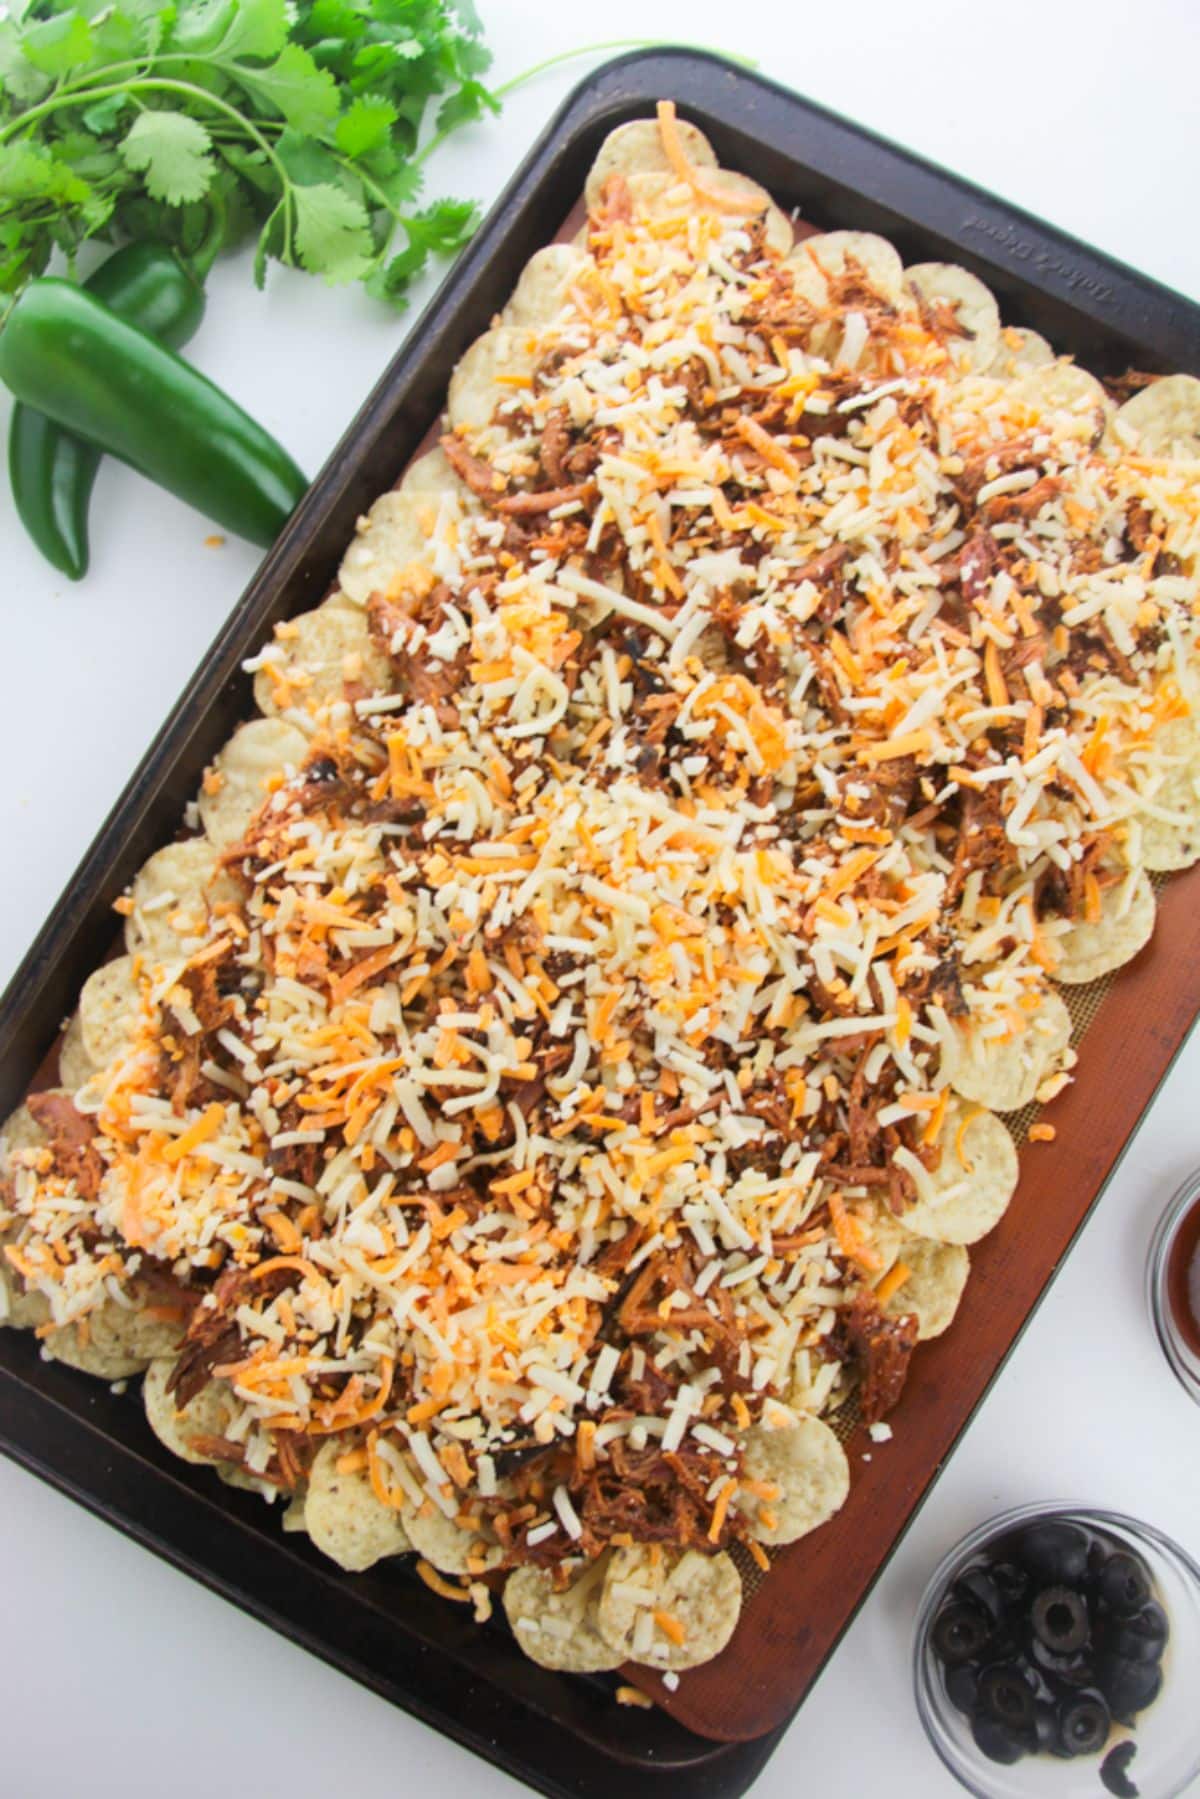 Tortilla chips with pulled pork and shredded cheese on a baking sheet.